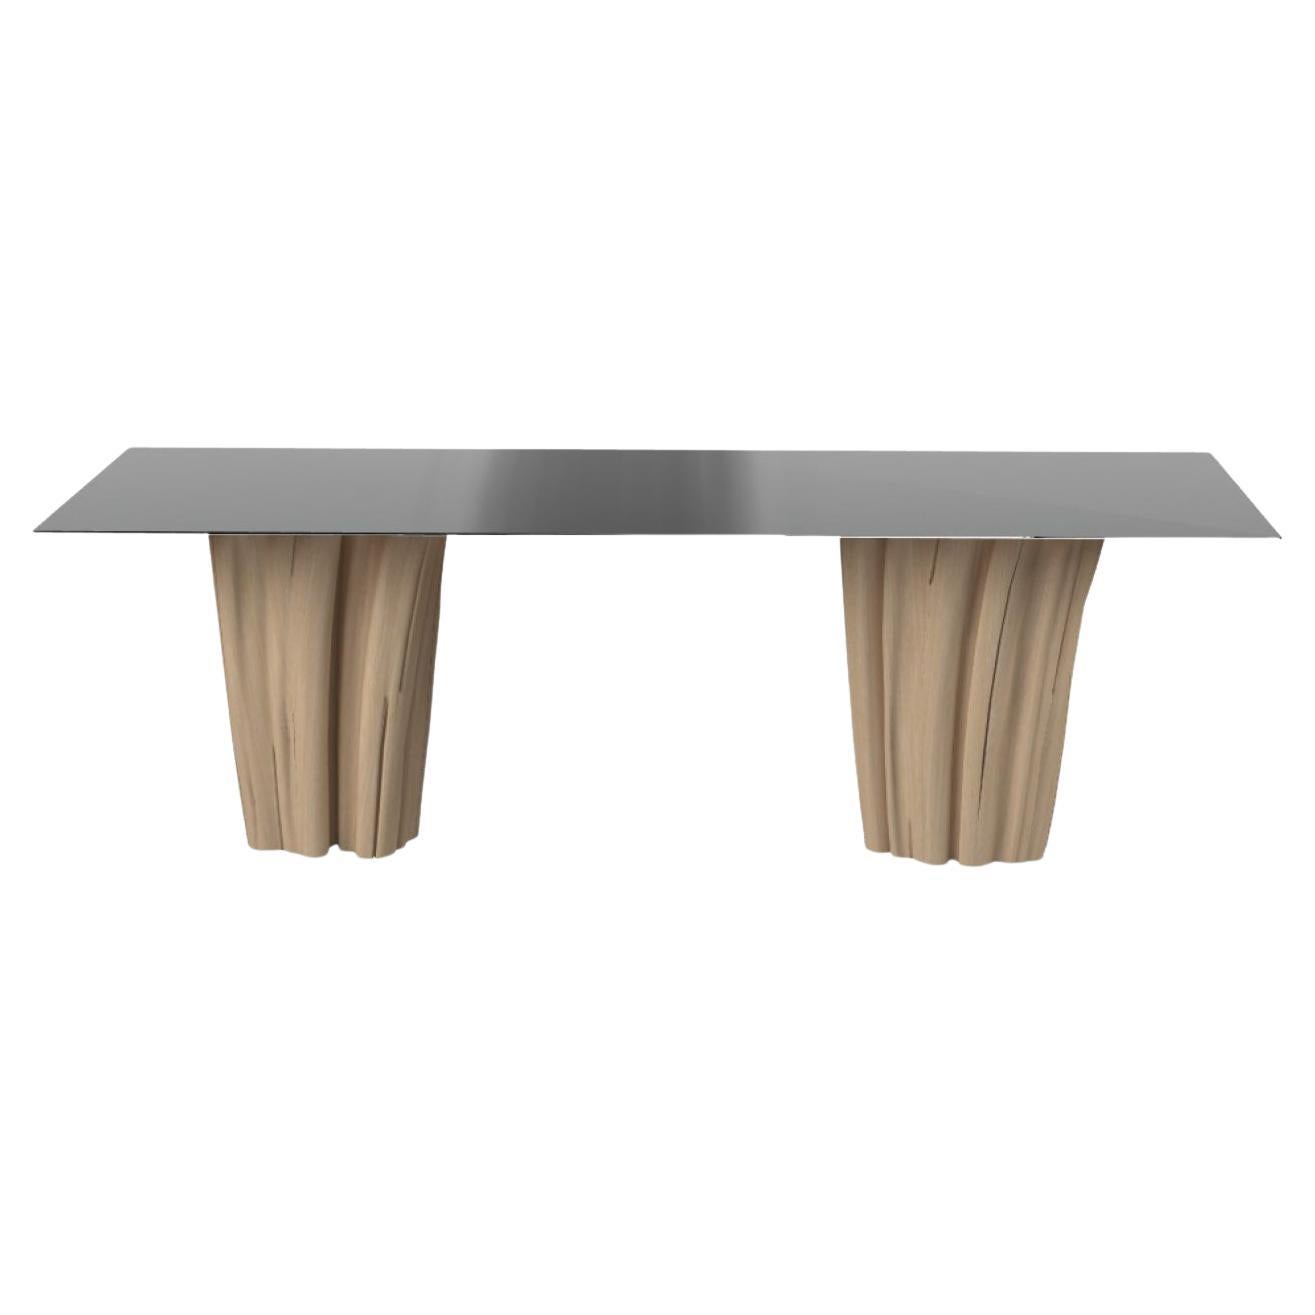 Gervasoni Large Brick Table in Waxed Iron Top with Natural Base by Paola Navone